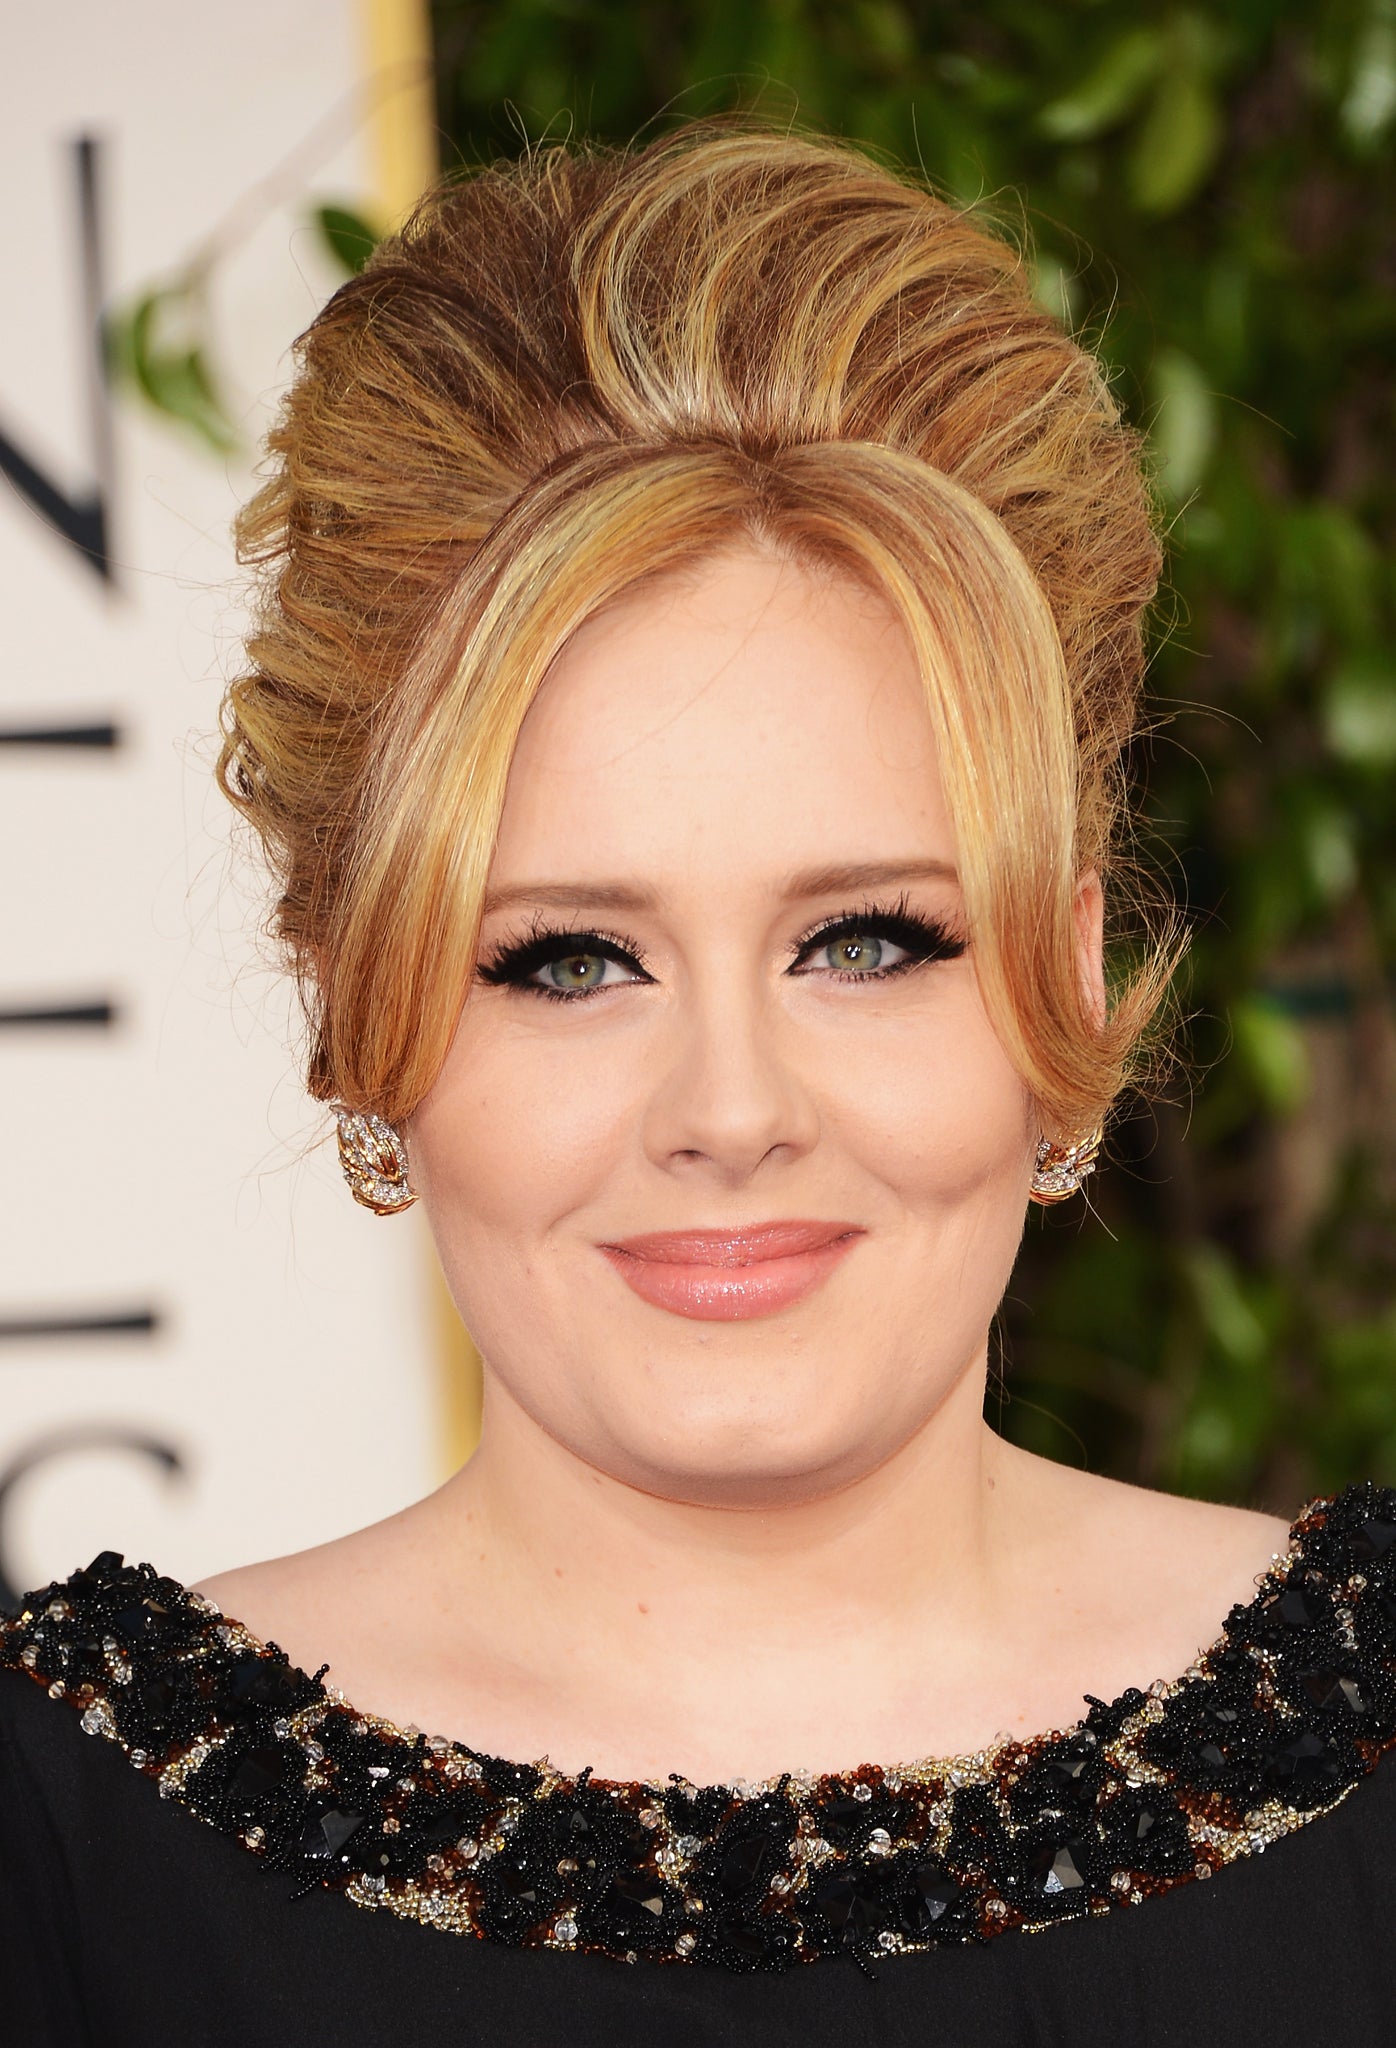 Adele has been asked to perform 'Skyfall' at the Oscars